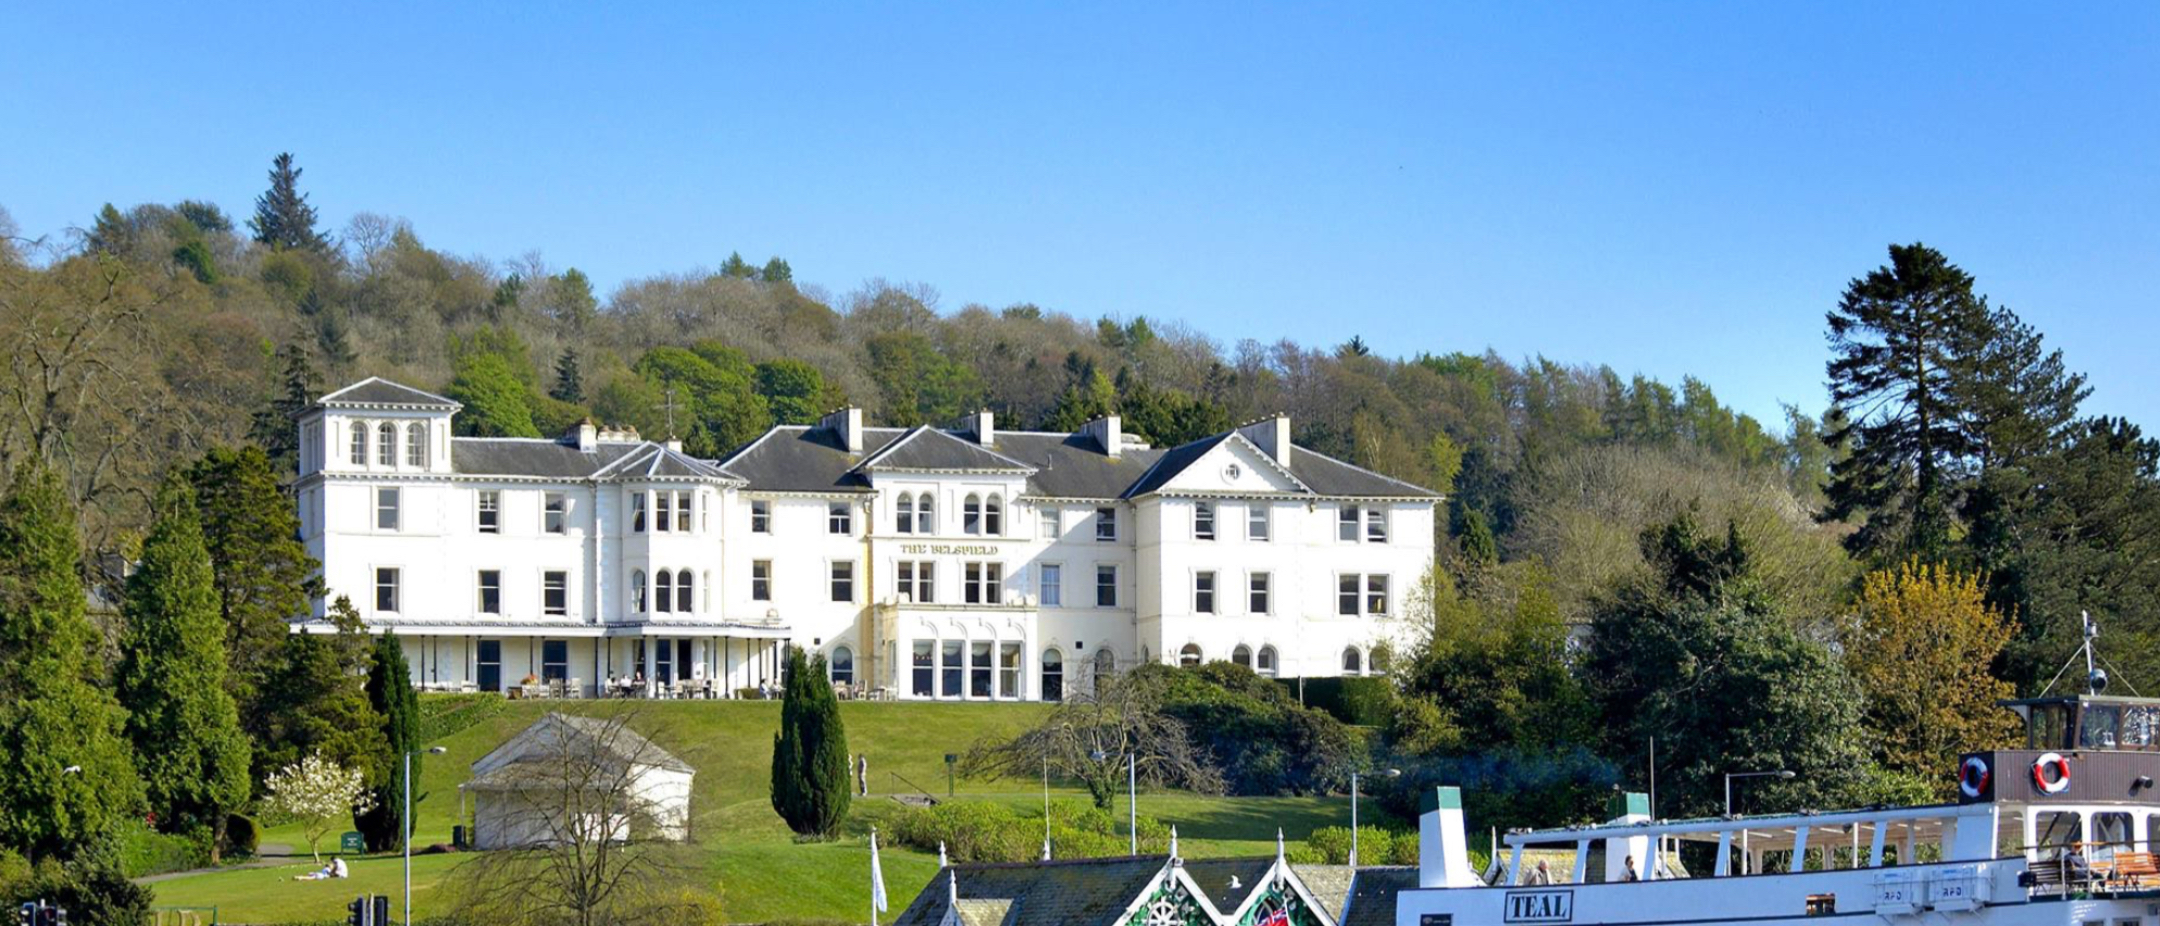 The Belsfield Hotel in Windermere, Lake District1